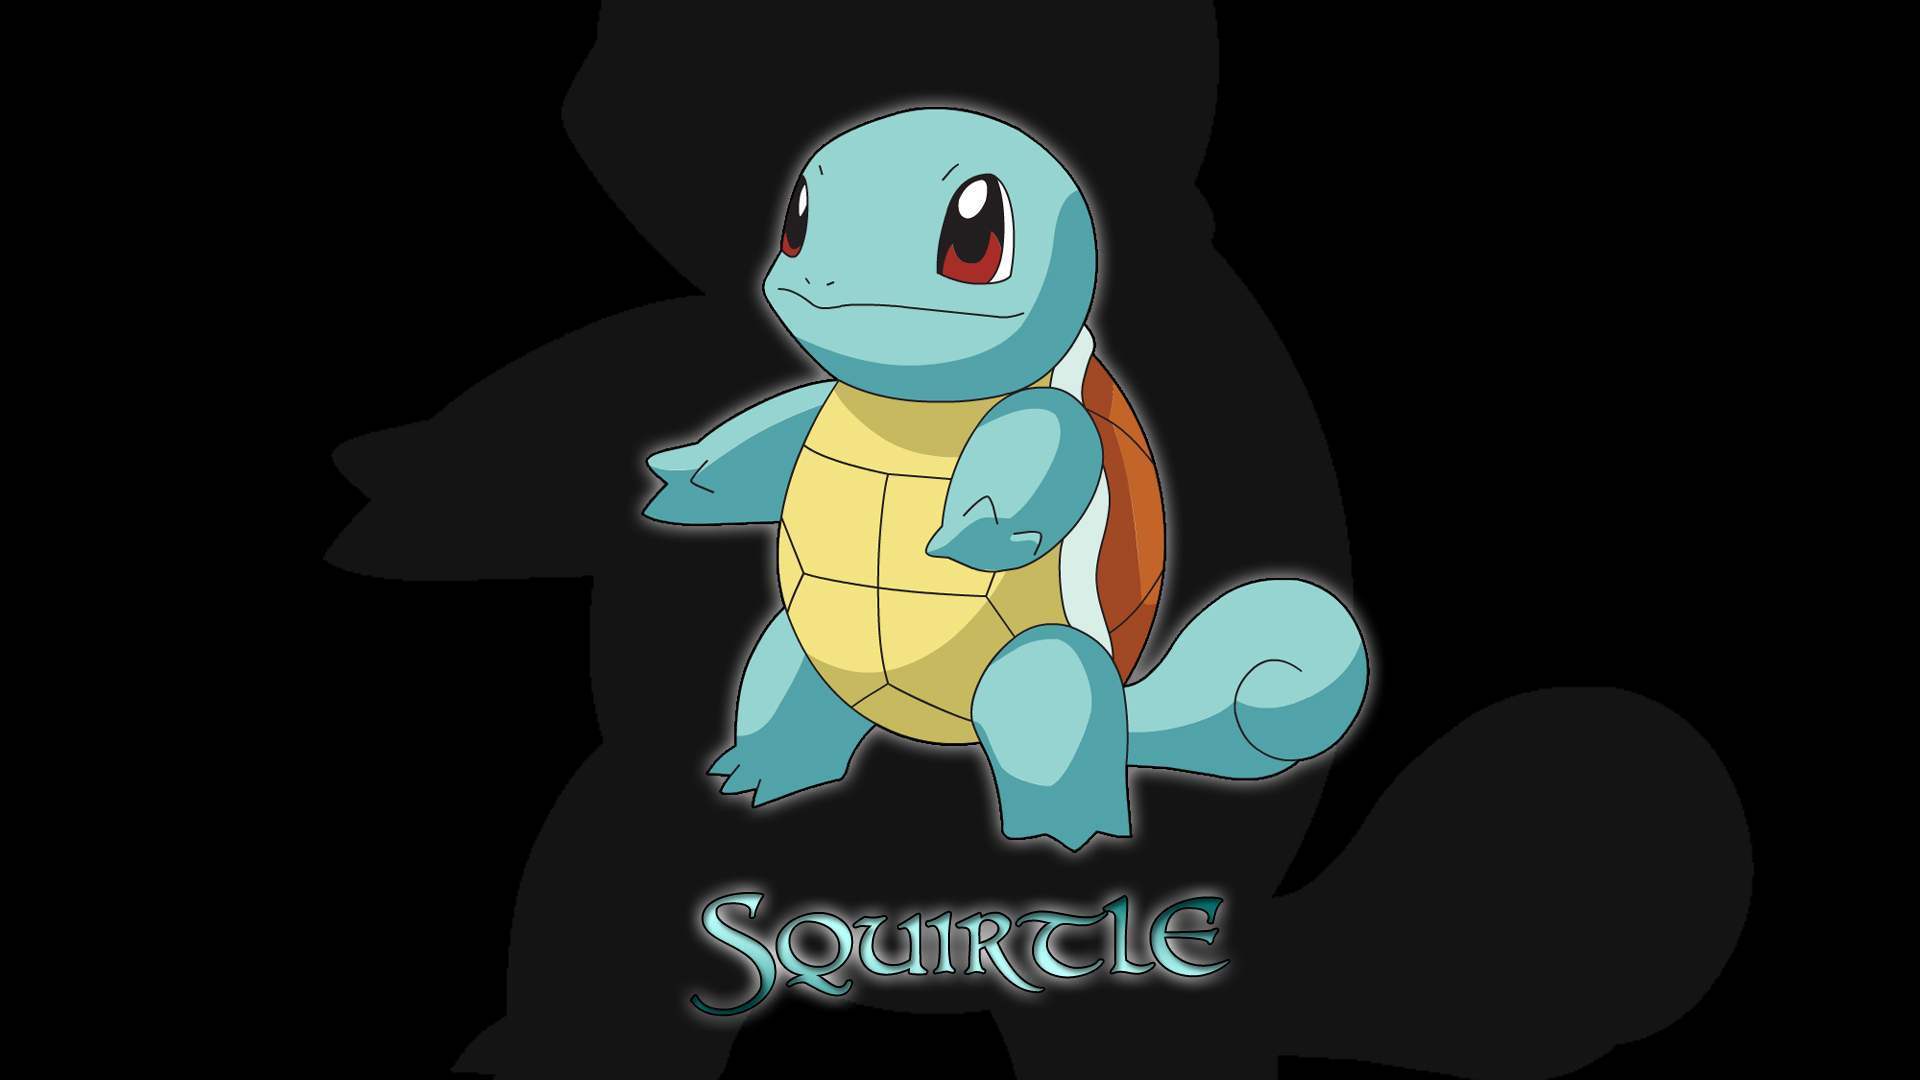 Squirtle Wallpaper Of Pokemon